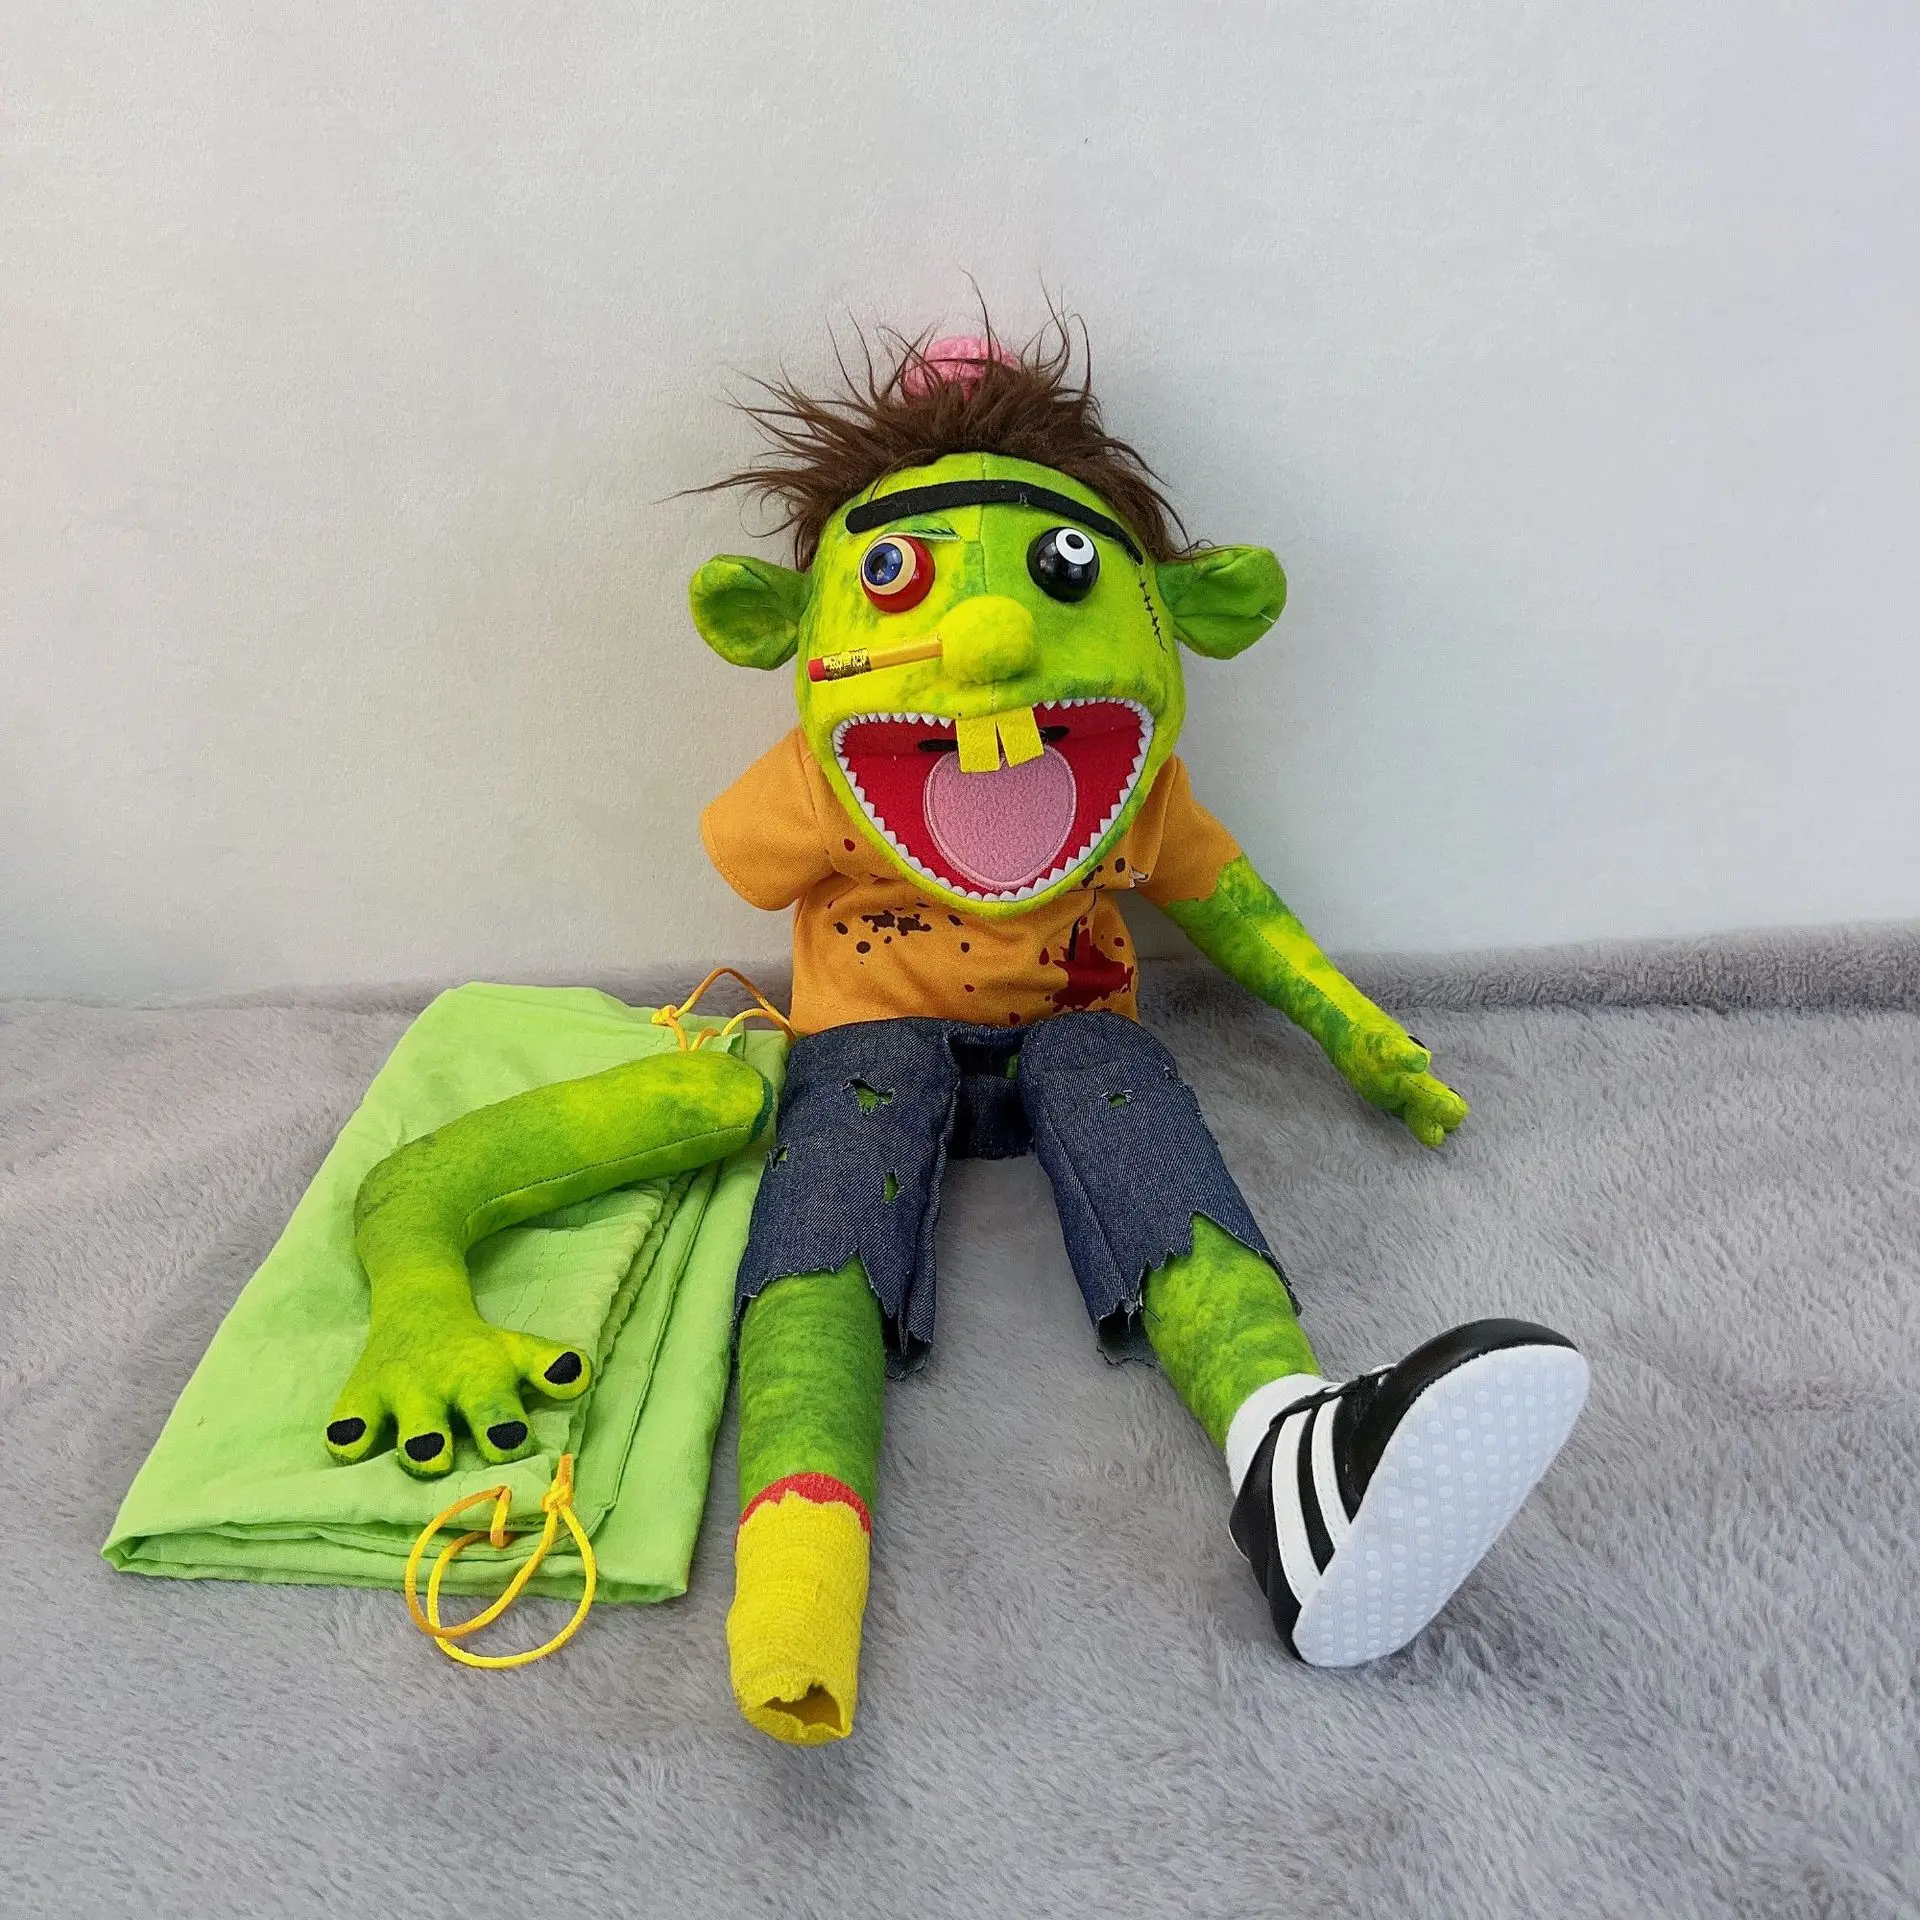 Jeffy Puppet Soft Makima Plush For Kids Mischievous Finger Puppet For  Birthday, Christmas, Halloween Party Playhouse From Yujia08, $46.32